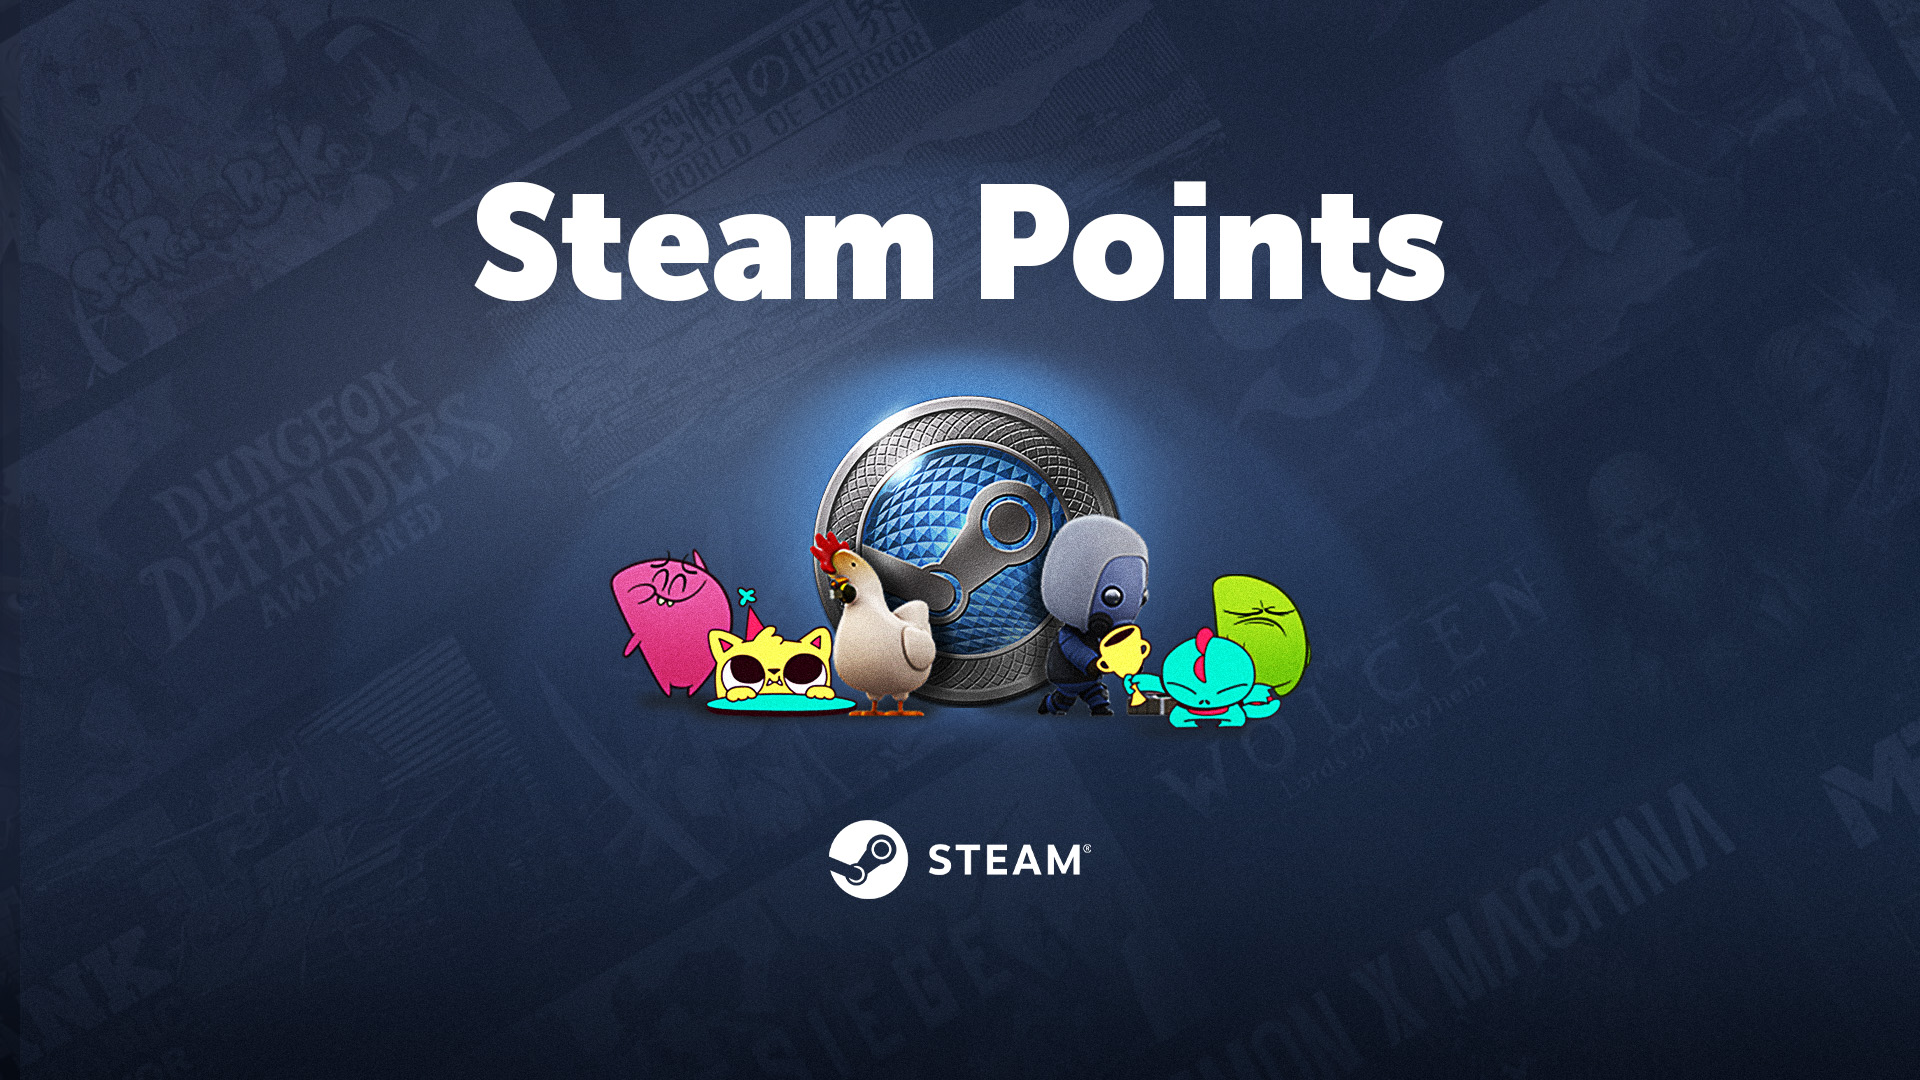 5.000 Steam Points Manual Delivery, 2.54 usd